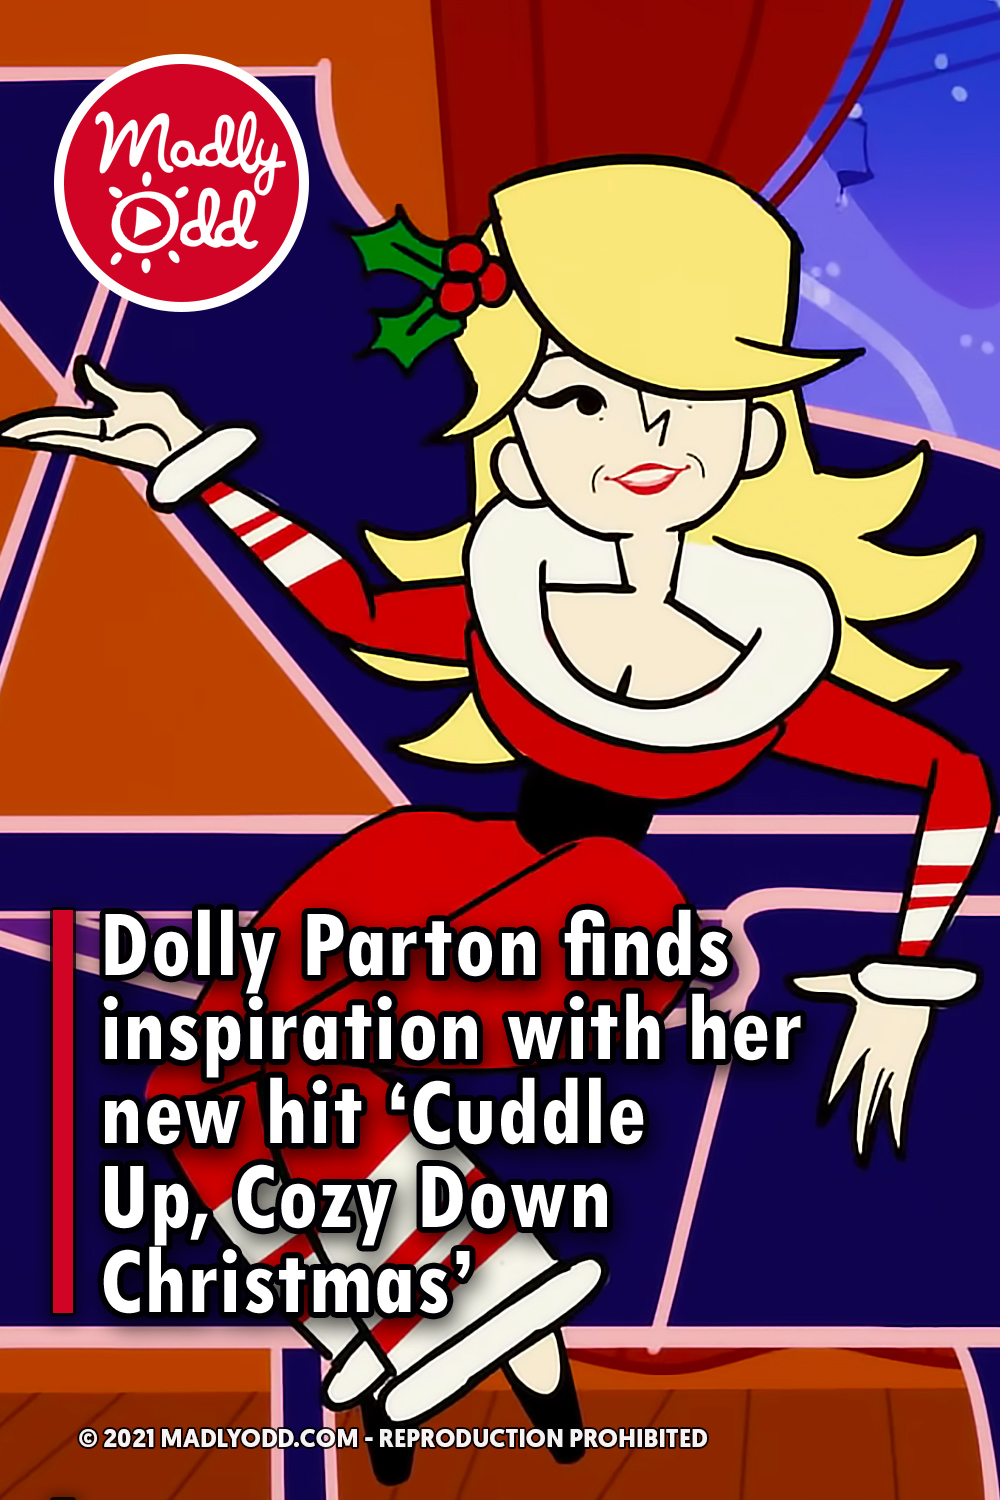 Dolly Parton finds inspiration with her new hit ‘Cuddle Up, Cozy Down Christmas’